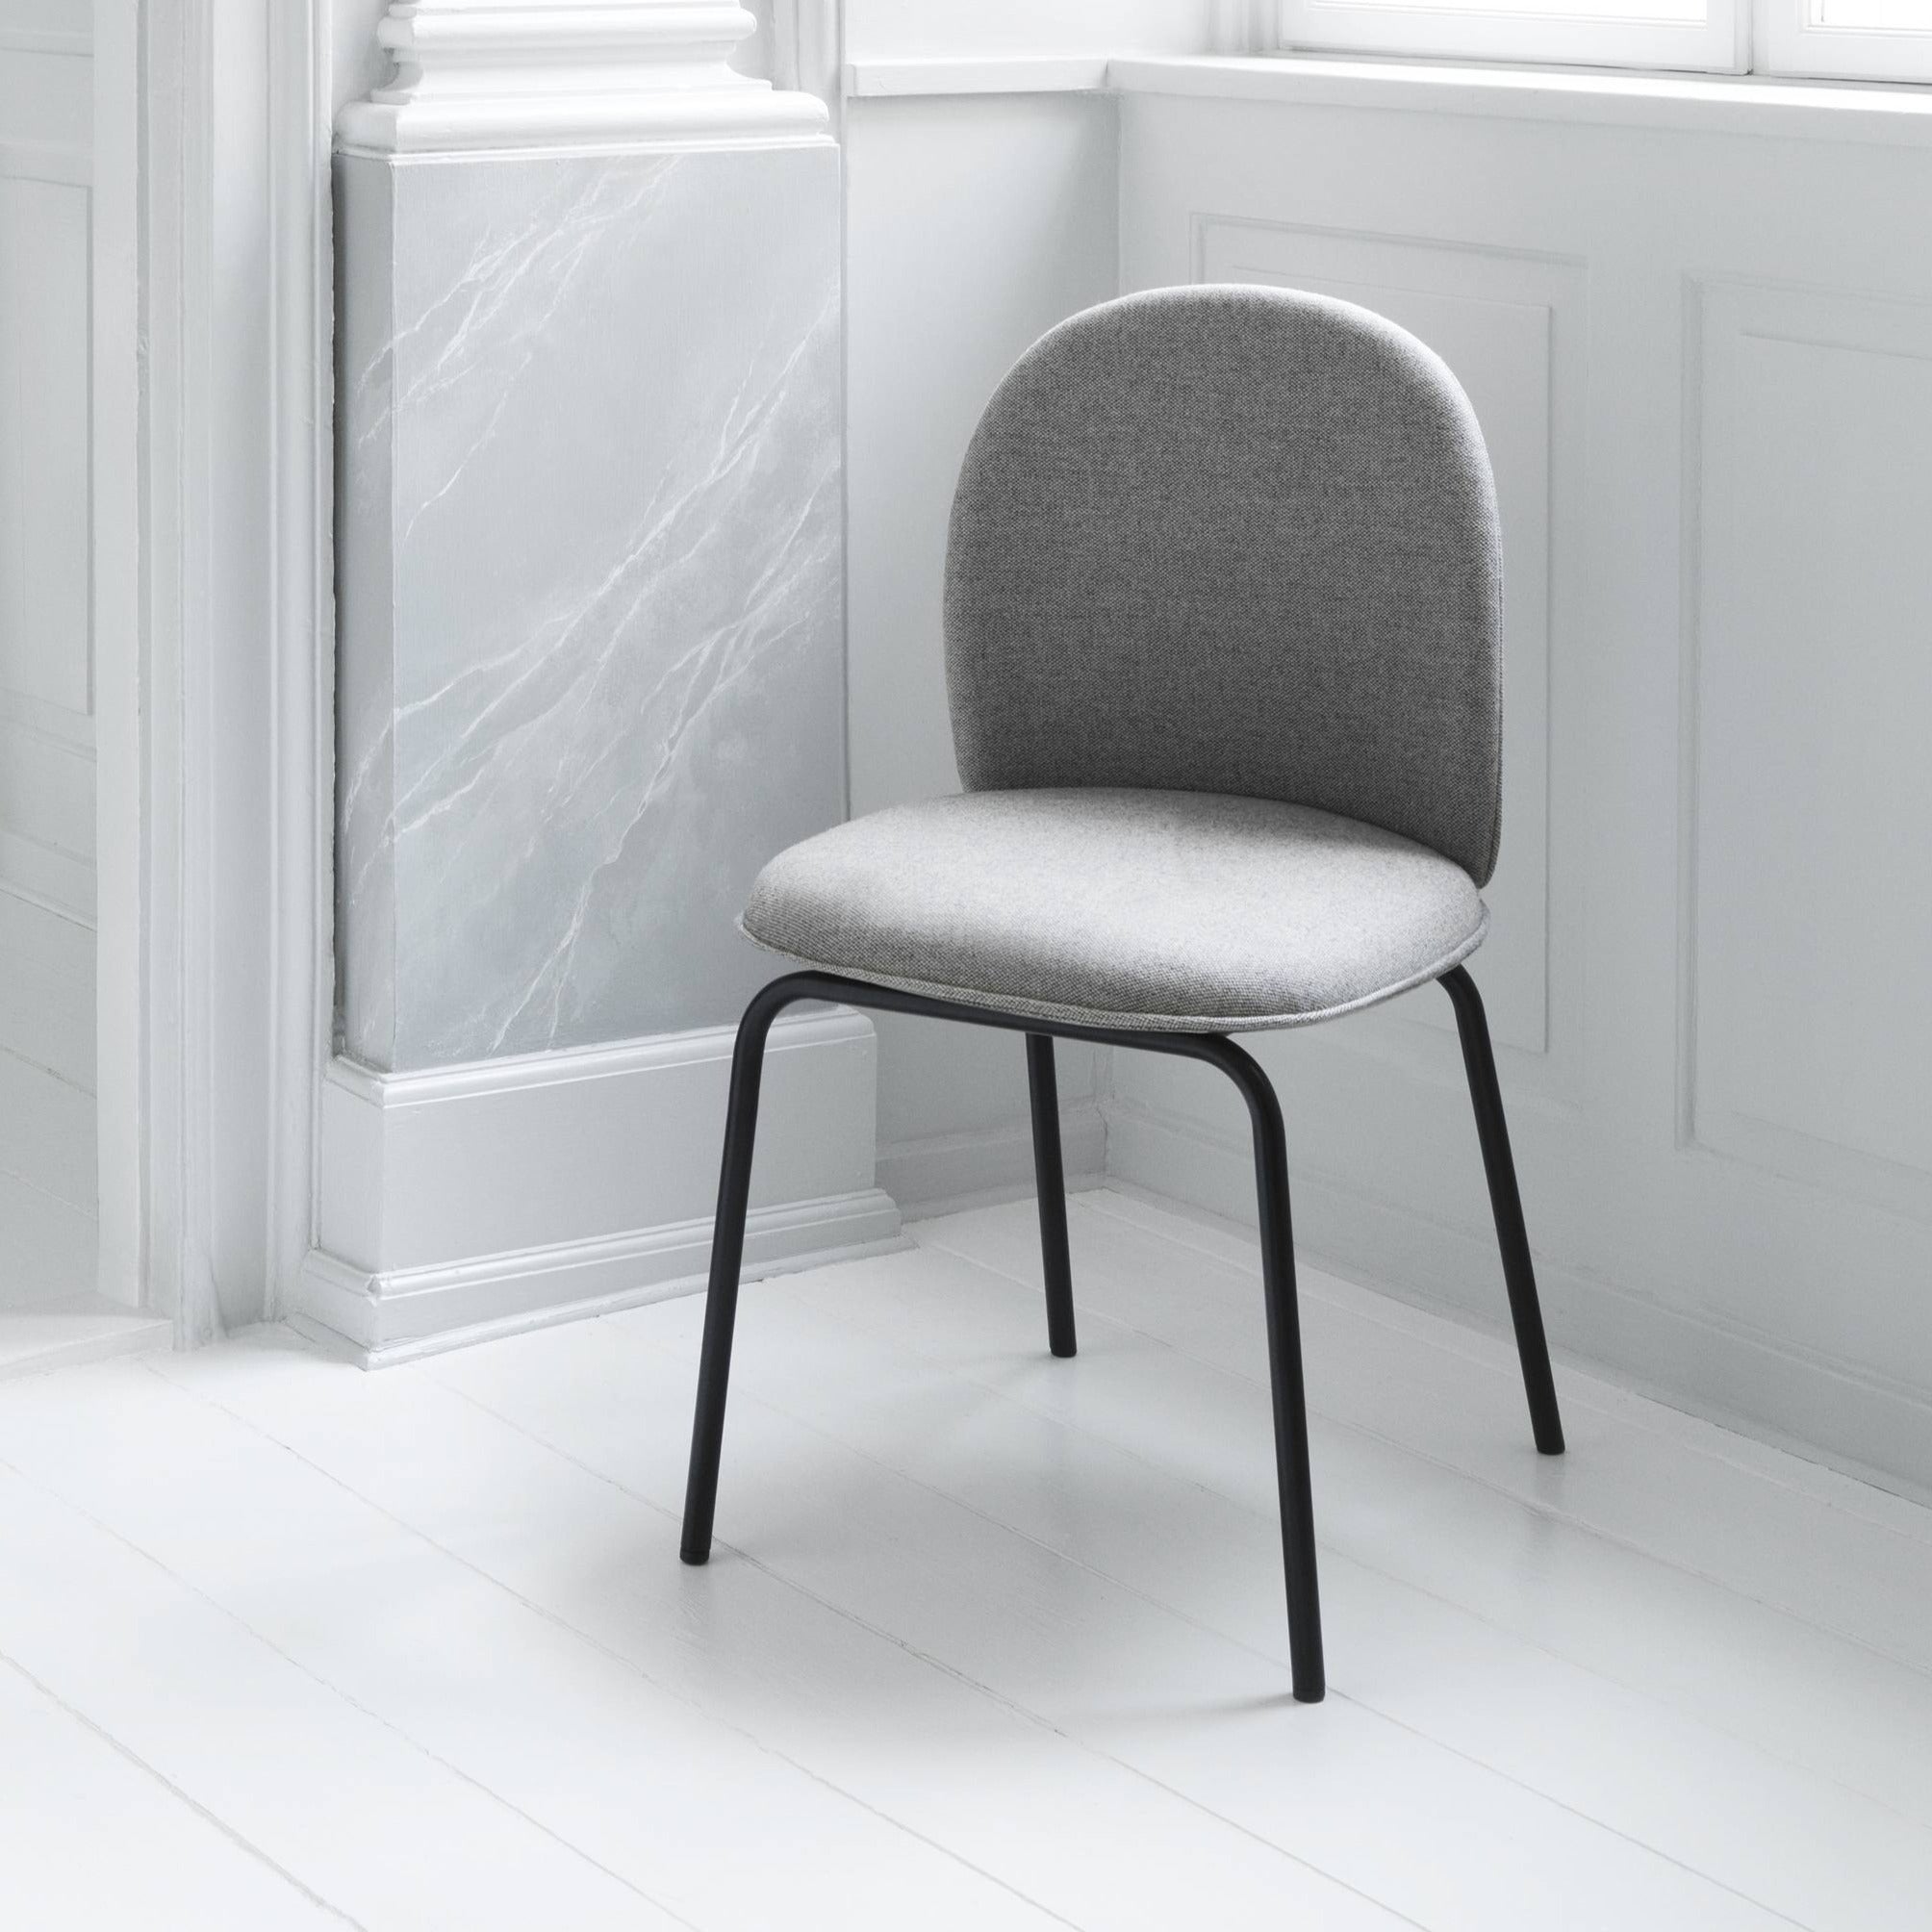 Ace Chair: Steel Base